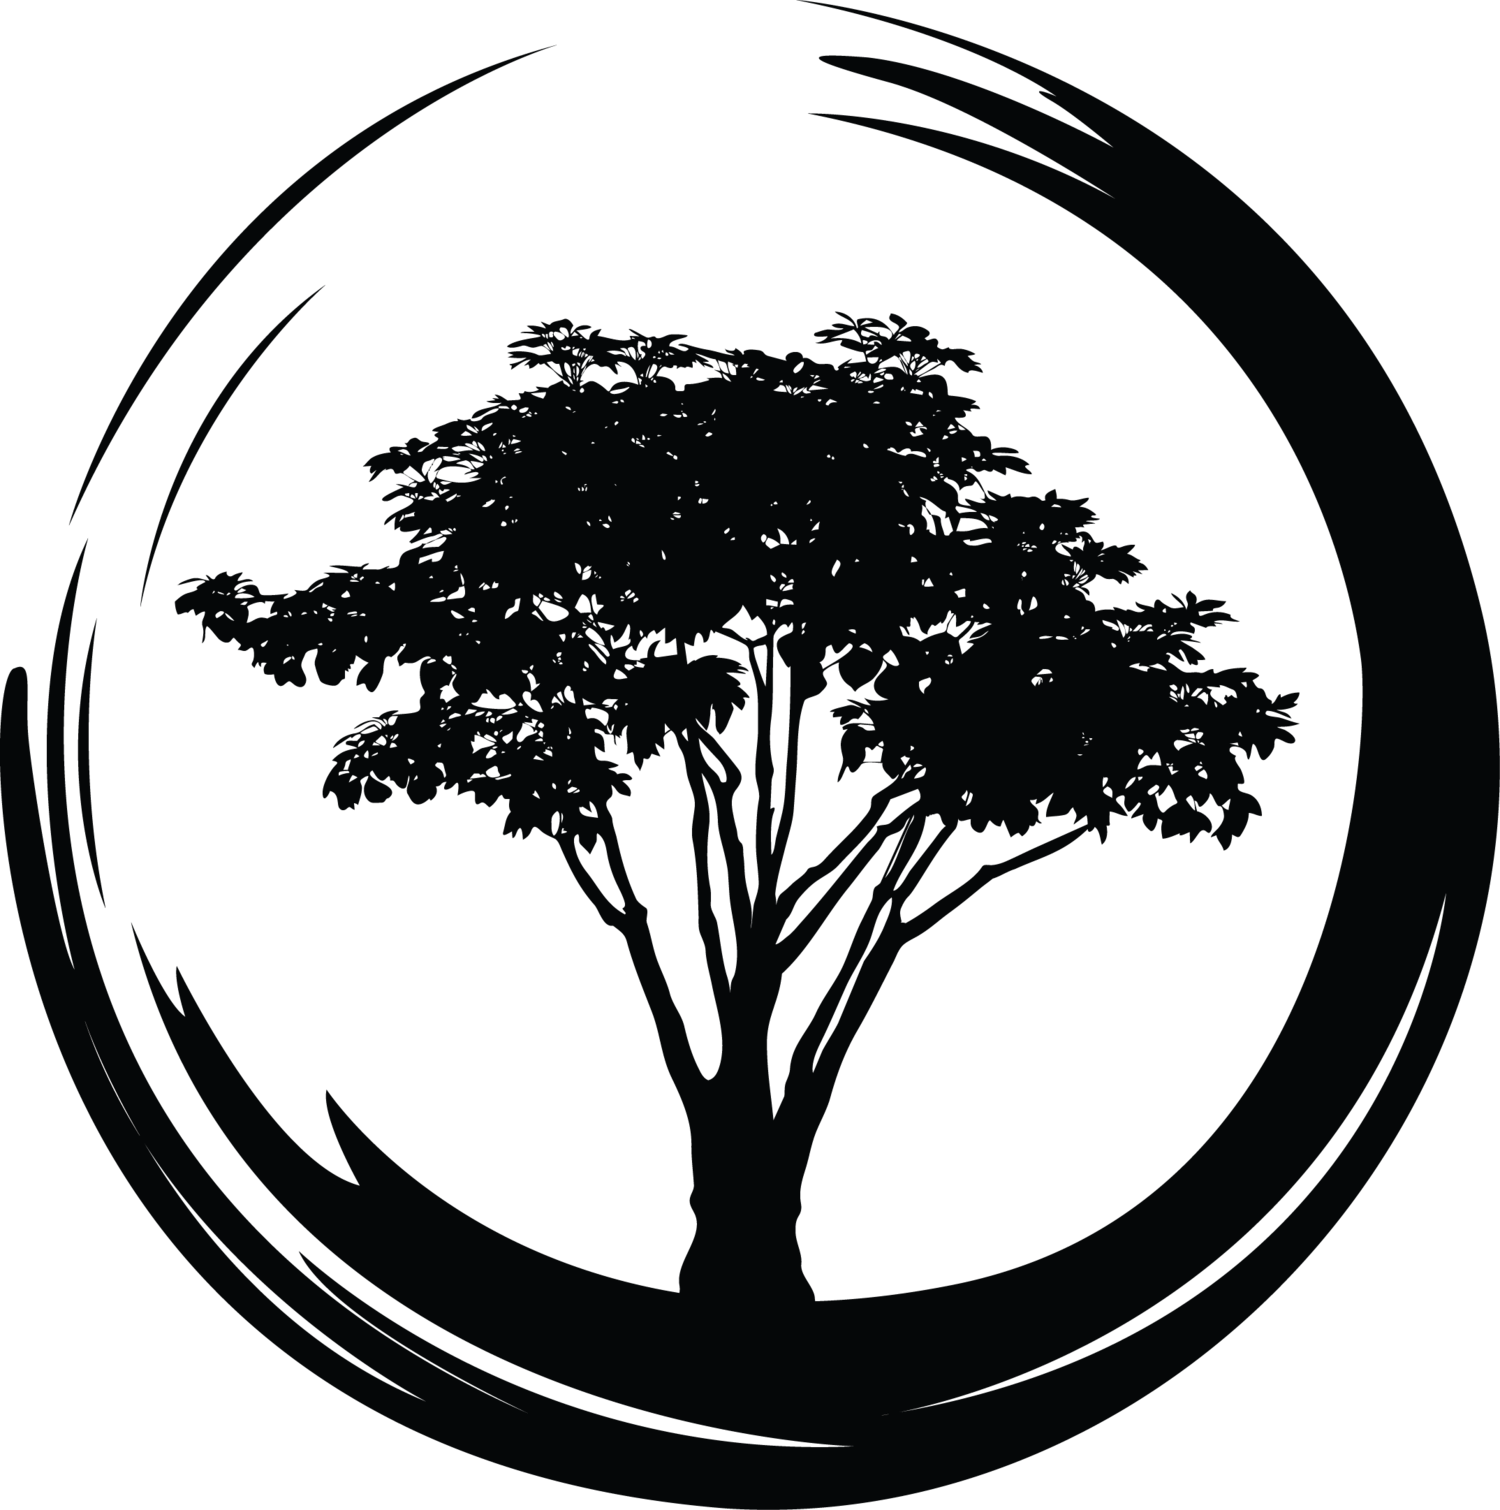 Black Tree in Circle Logo - About — The Breathing Tree